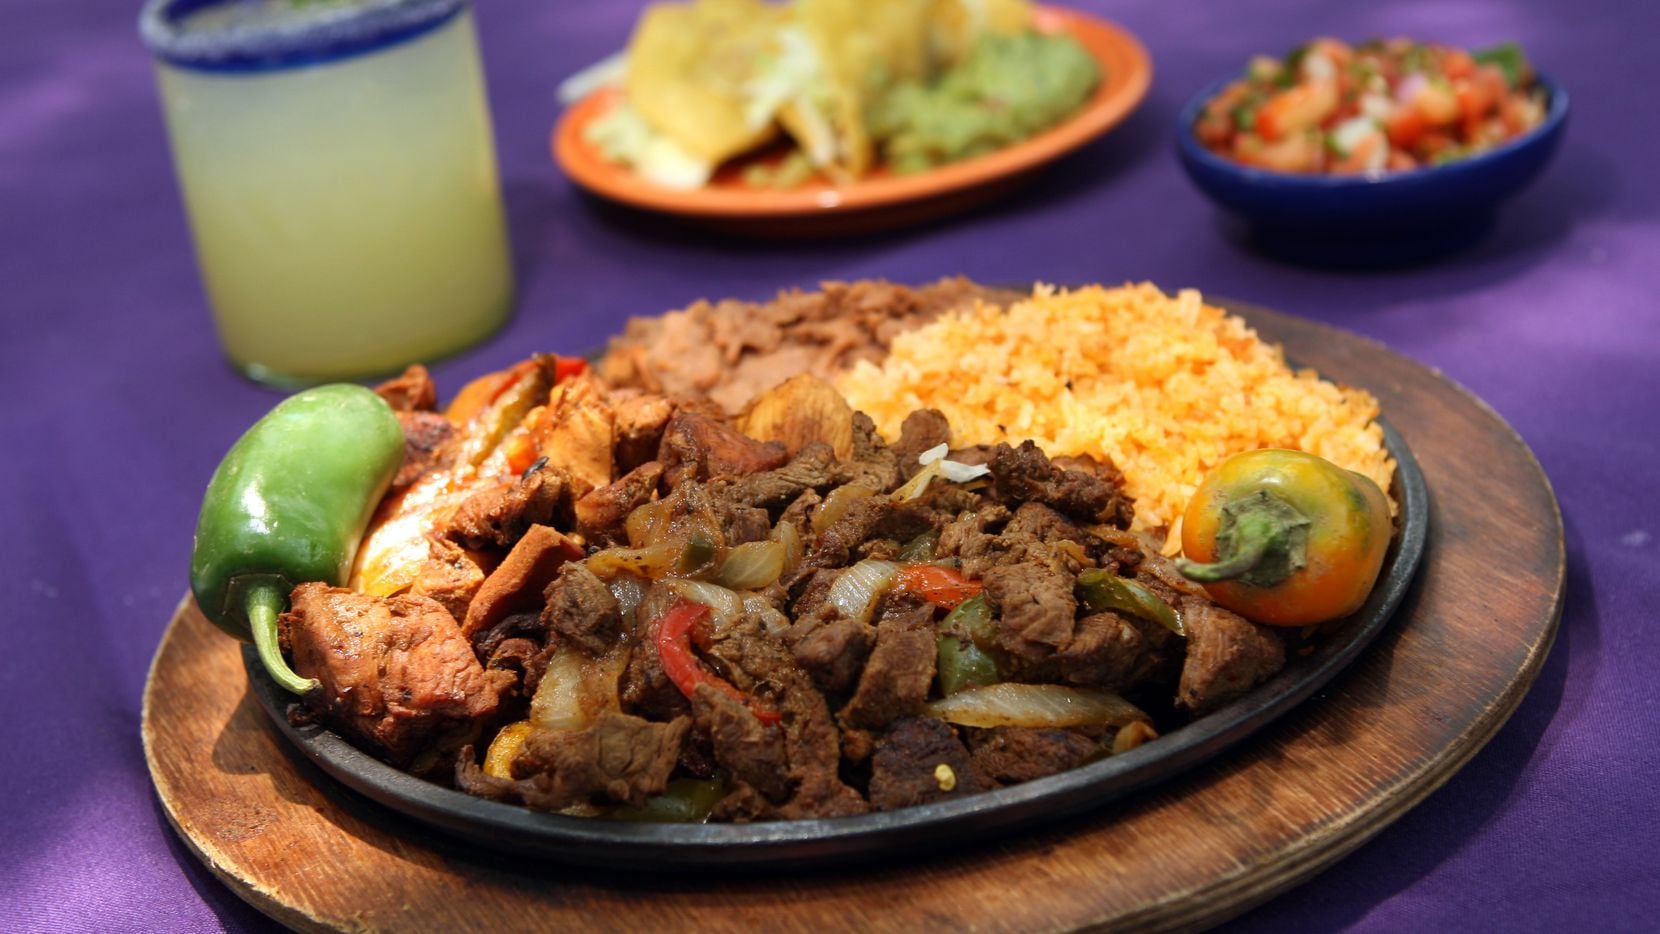 A margarita and a plate of Tex-Mex on the patio at Joe T. Garcia's in Fort Worth: That's a...